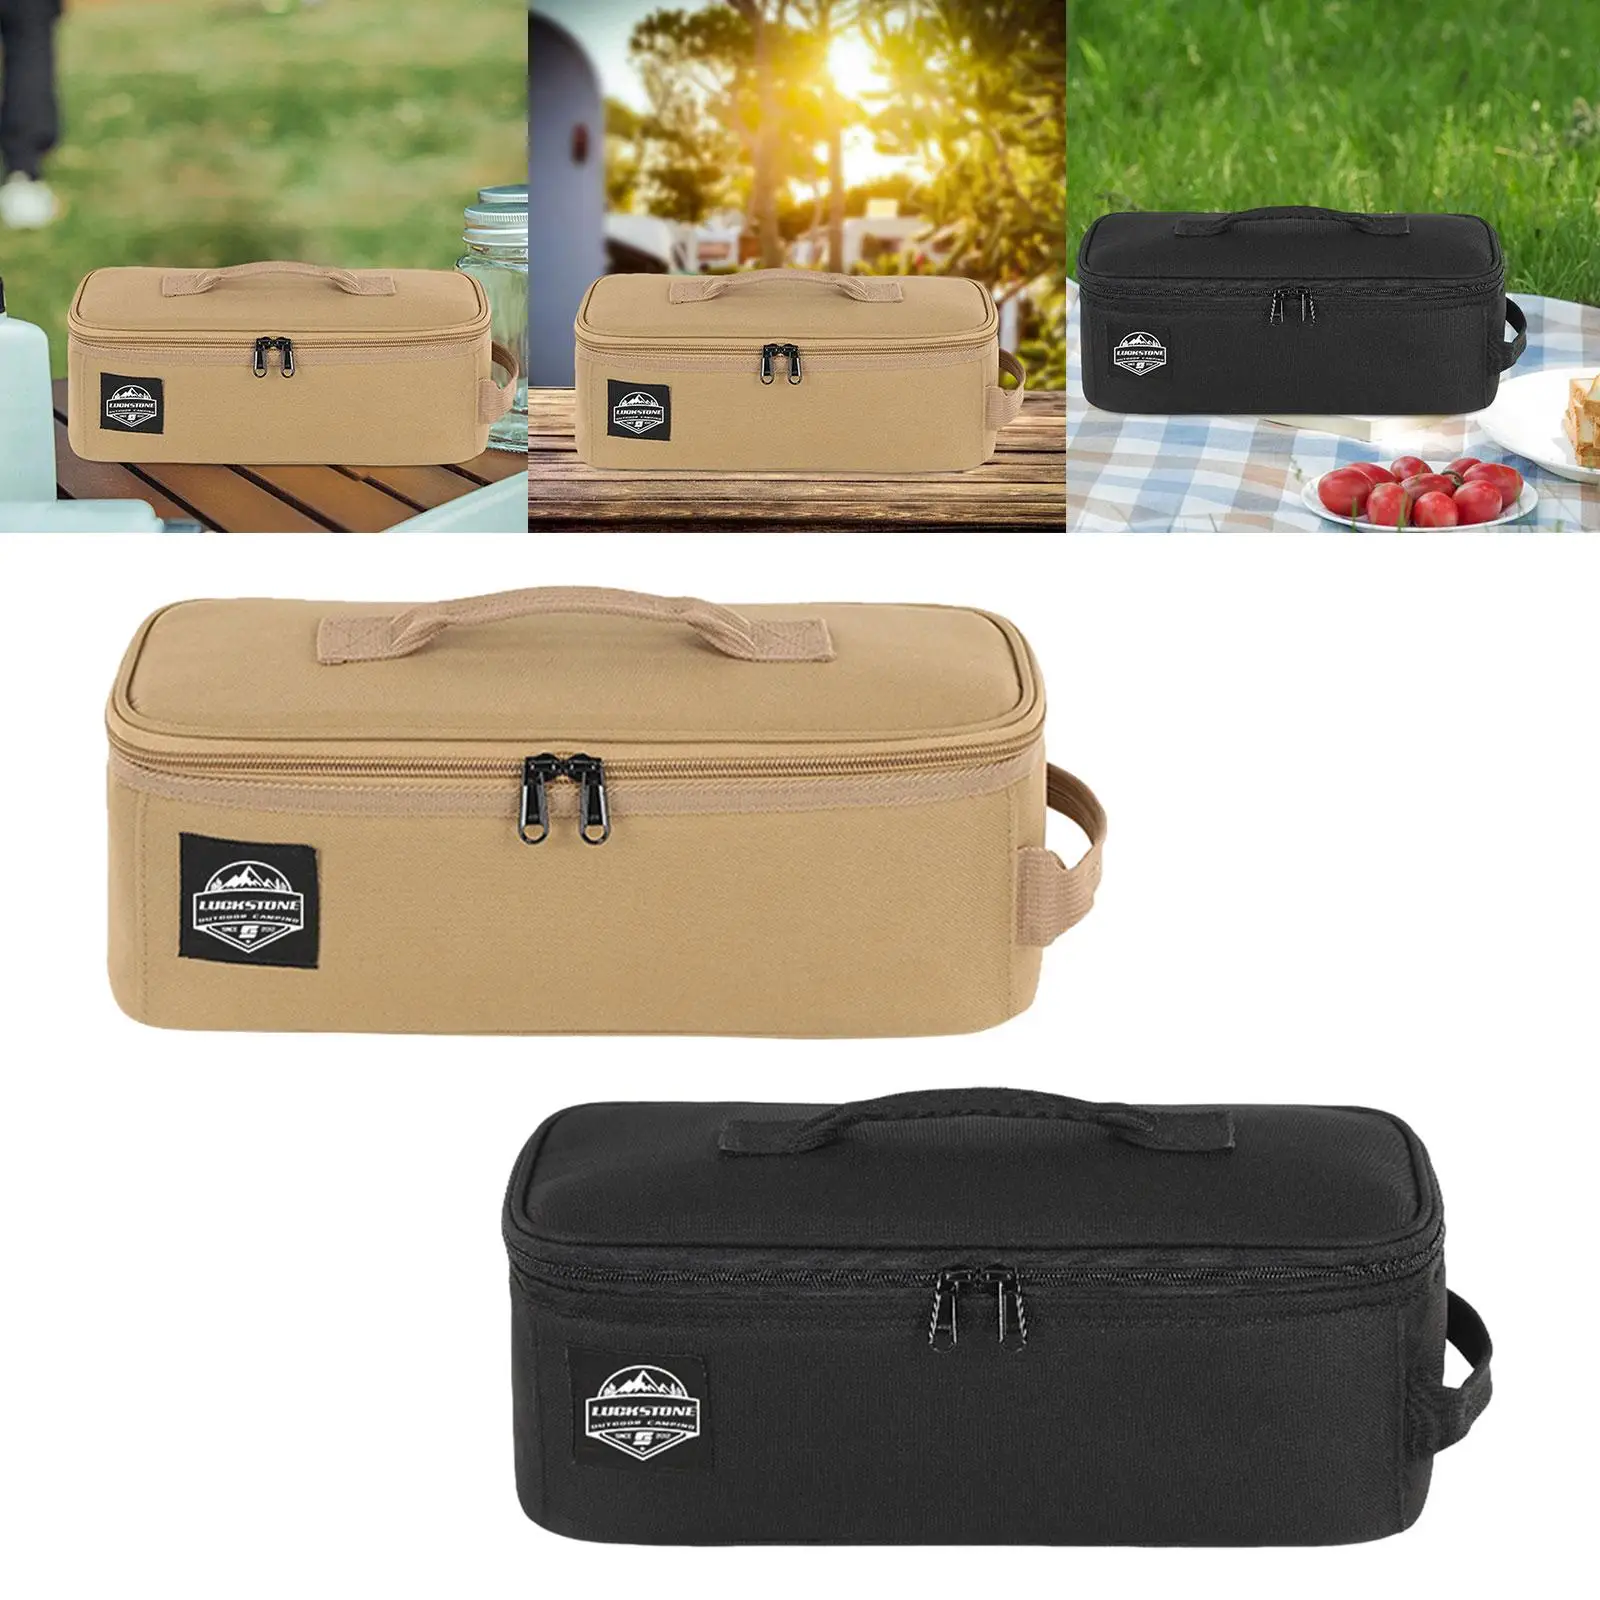 Camping Organizer Cooking Utensils Pouch for Beach Picnics Barbecue